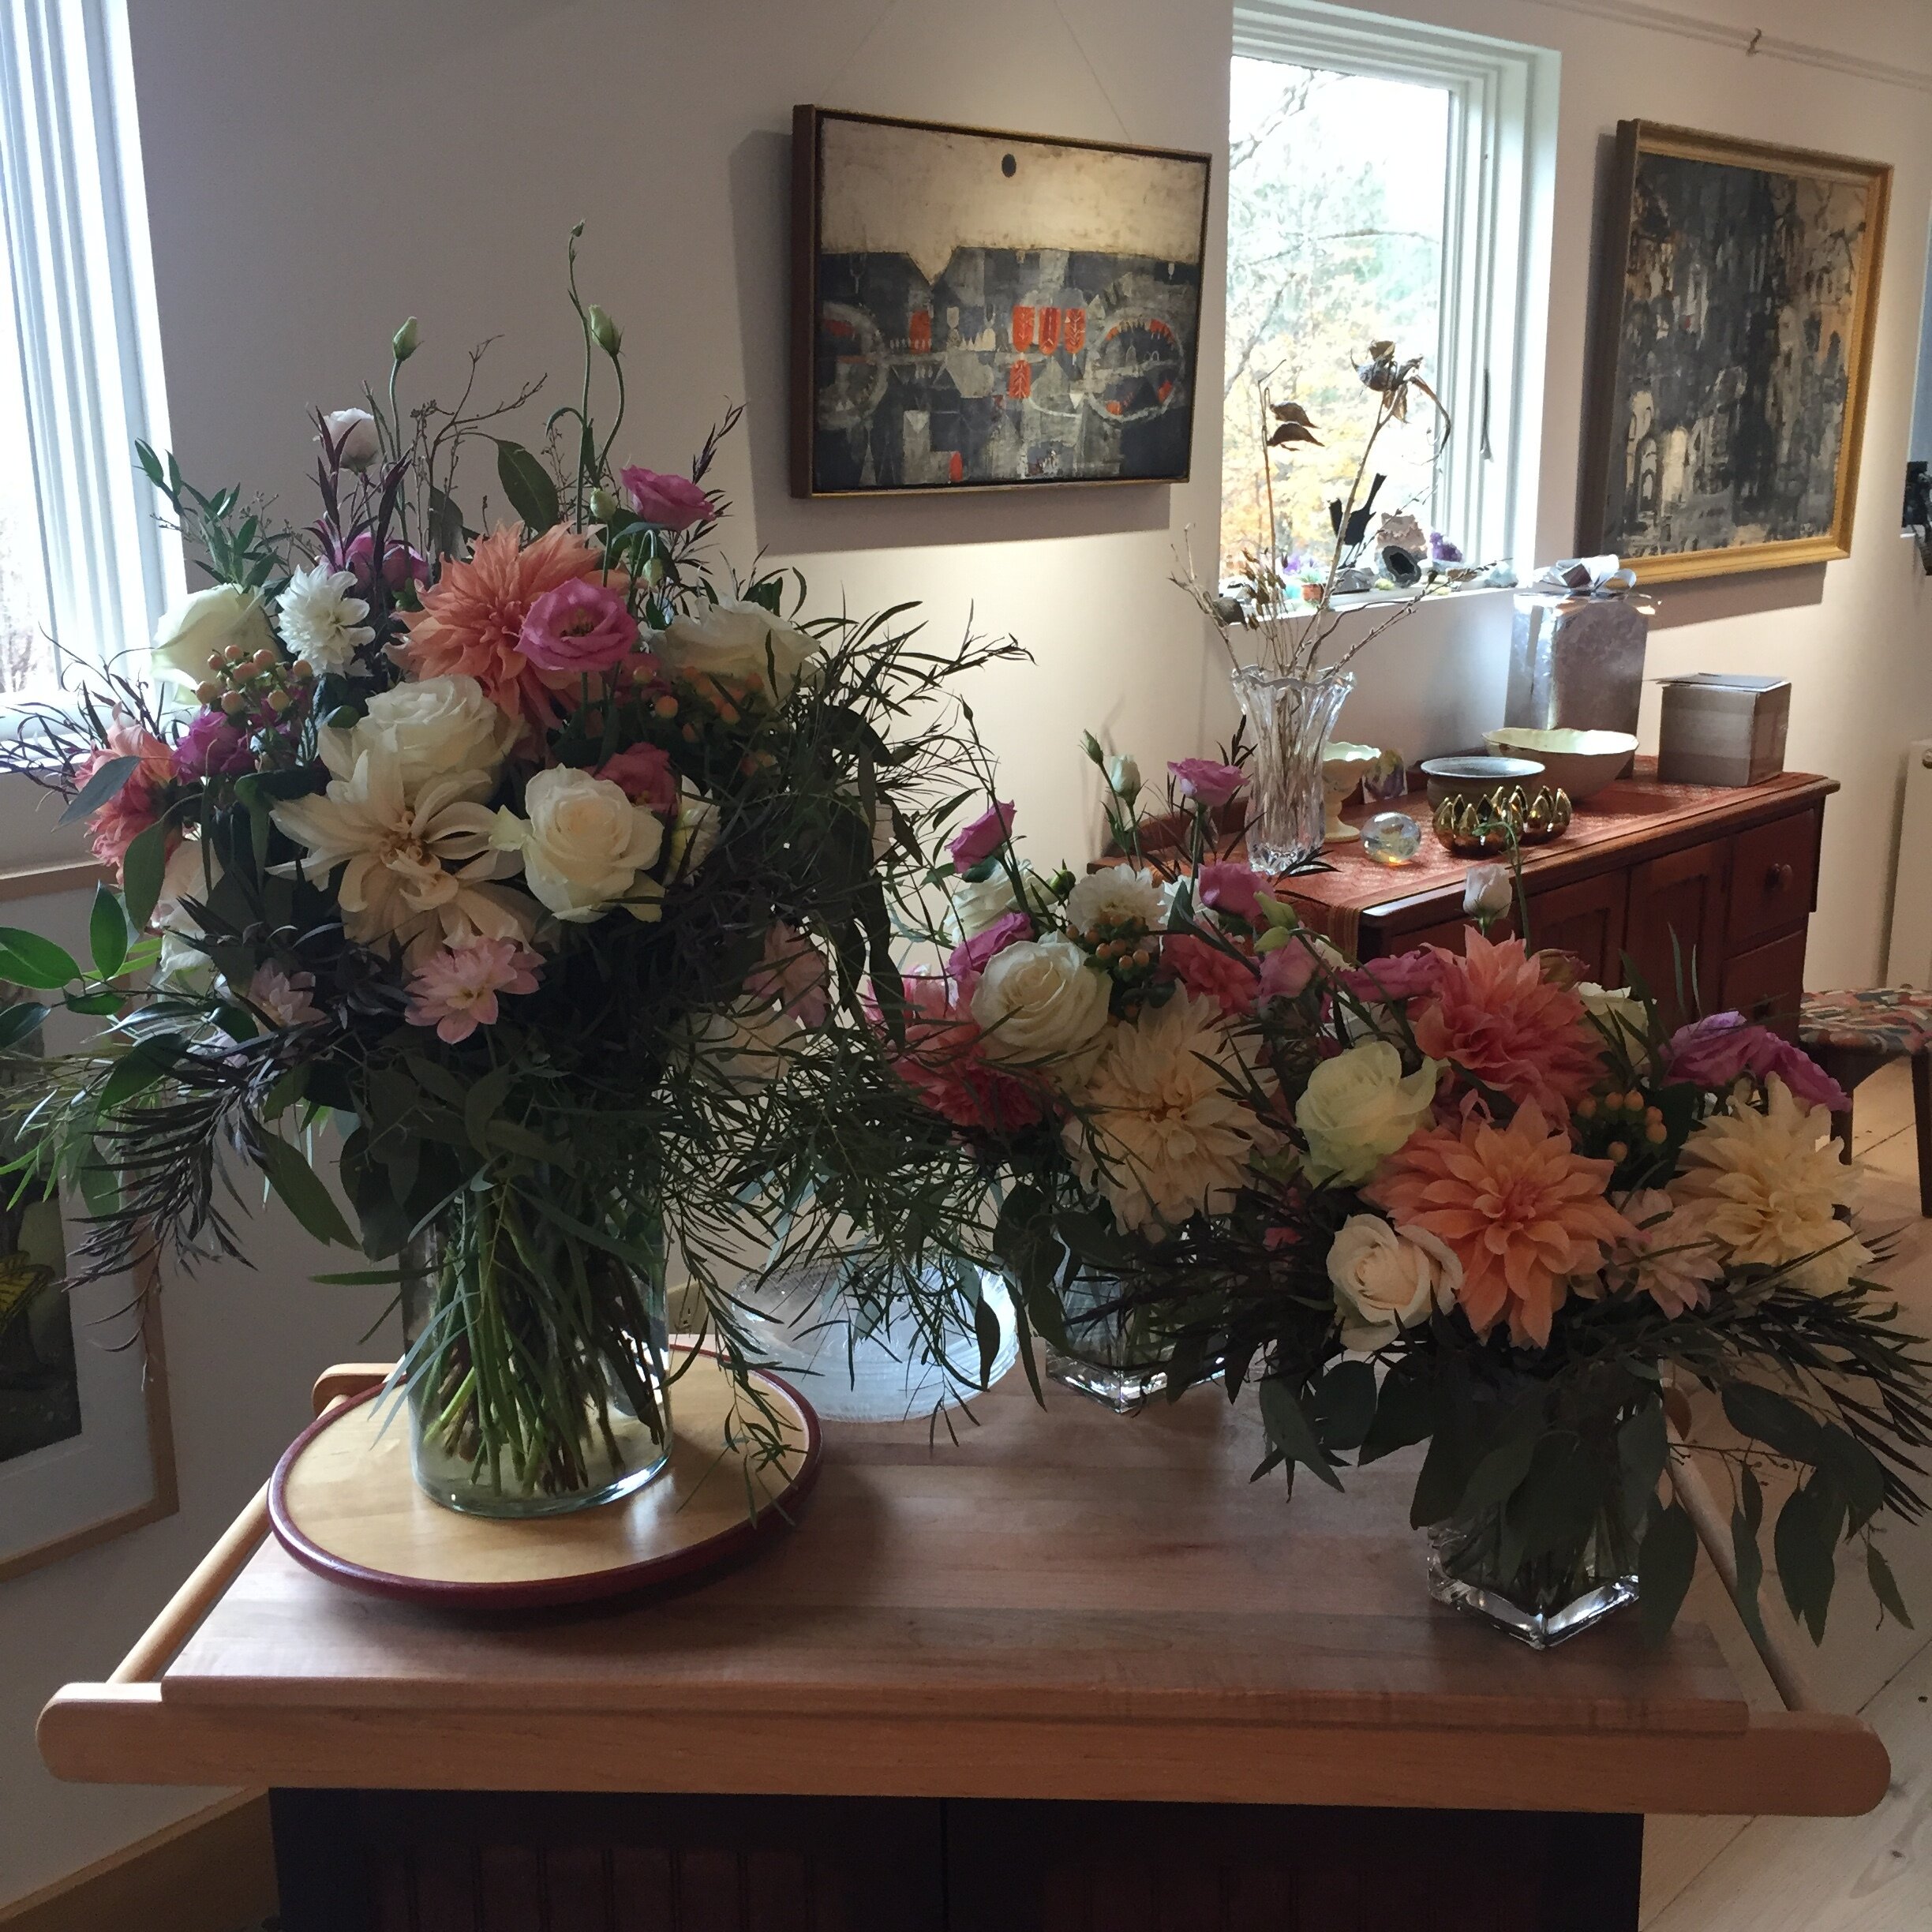 Wedding Bouquets in client's home